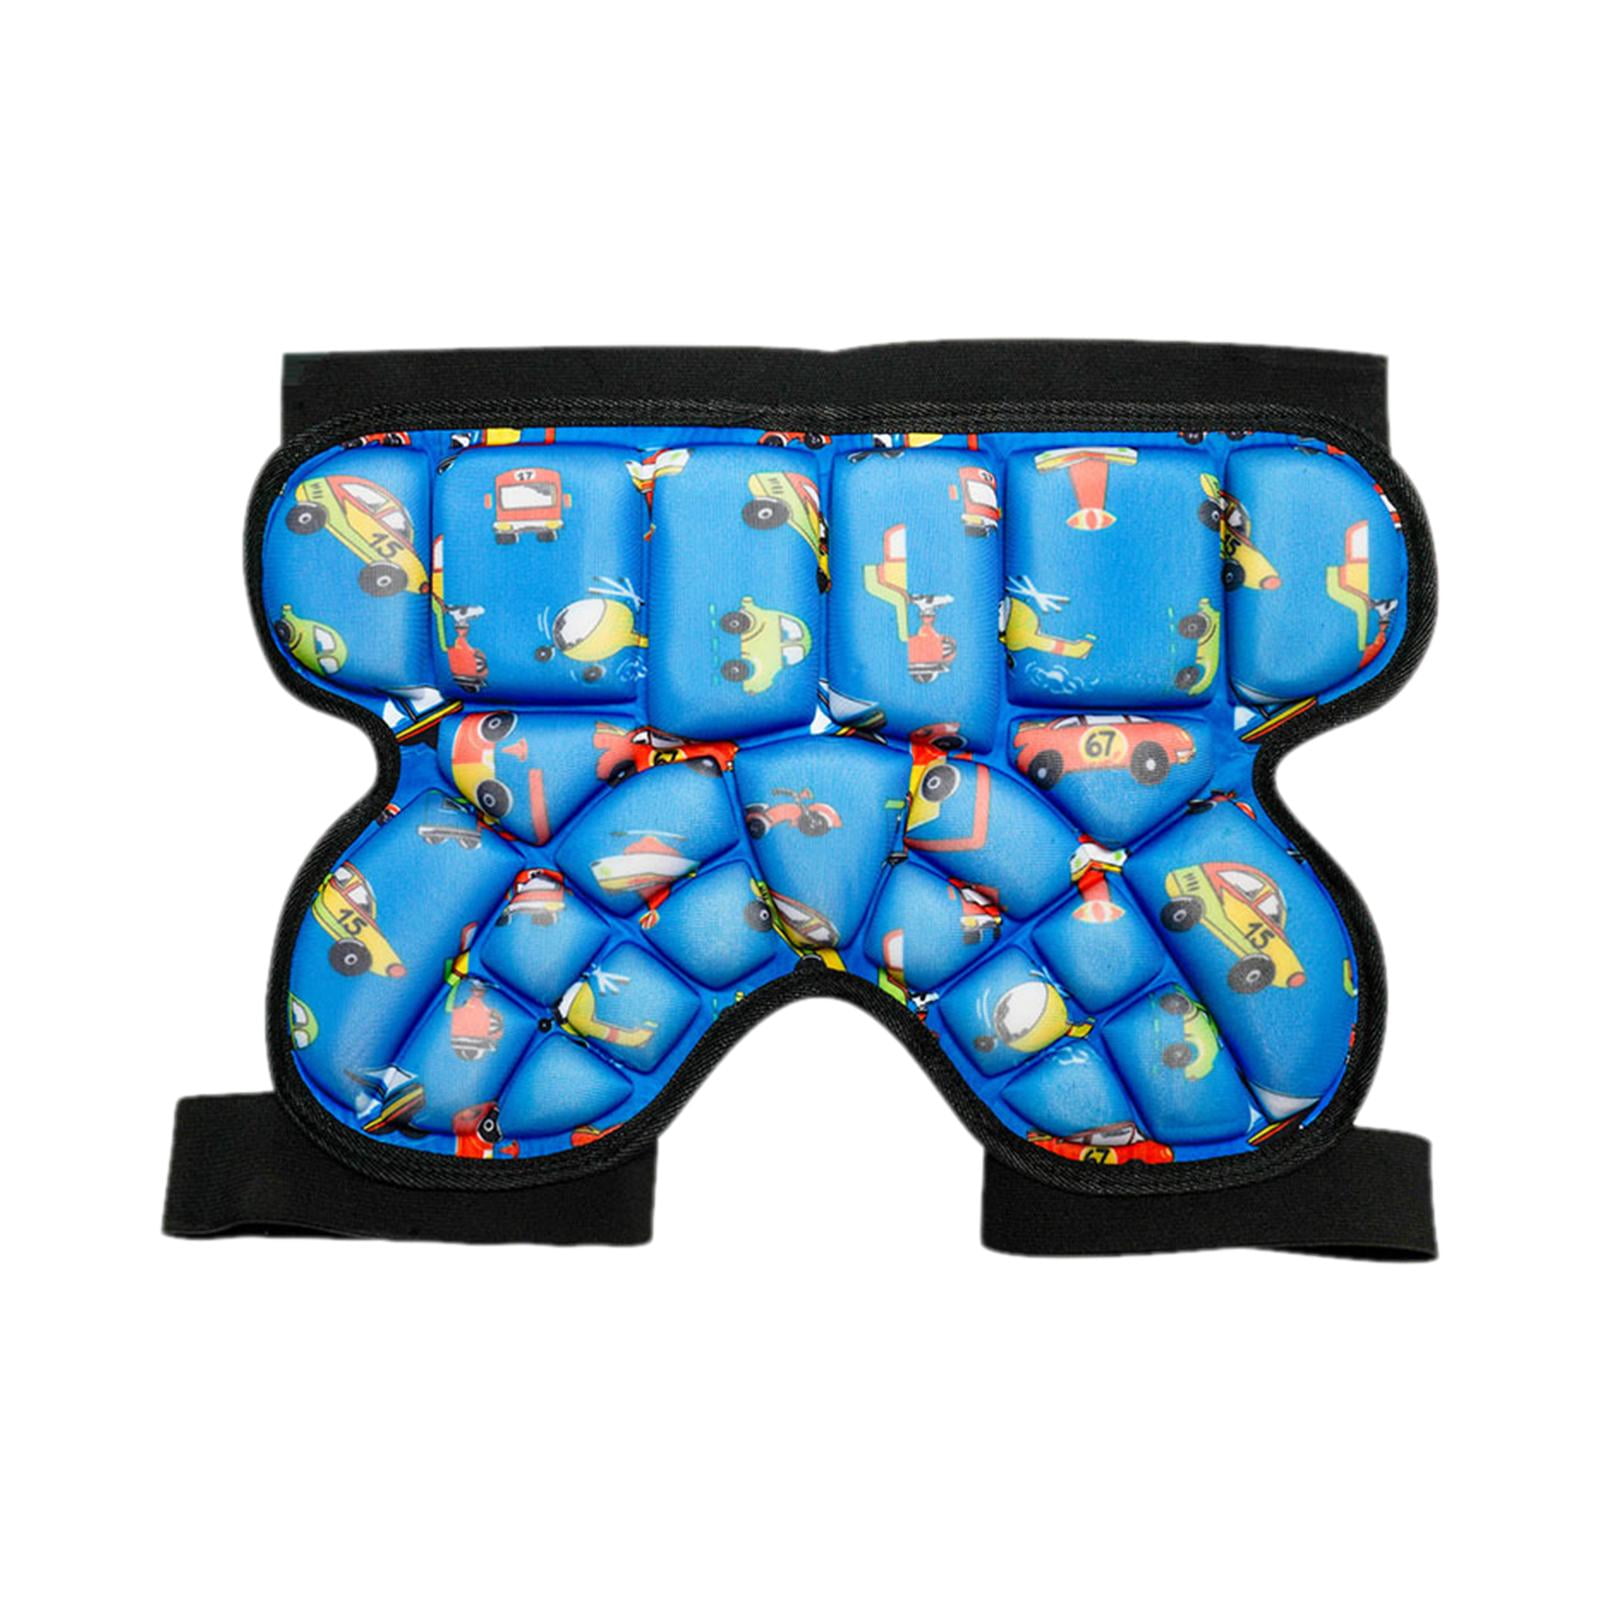 Details about   Soft 3D Padded Hip Protective Short Kids Padded Shorts Protective Gear 